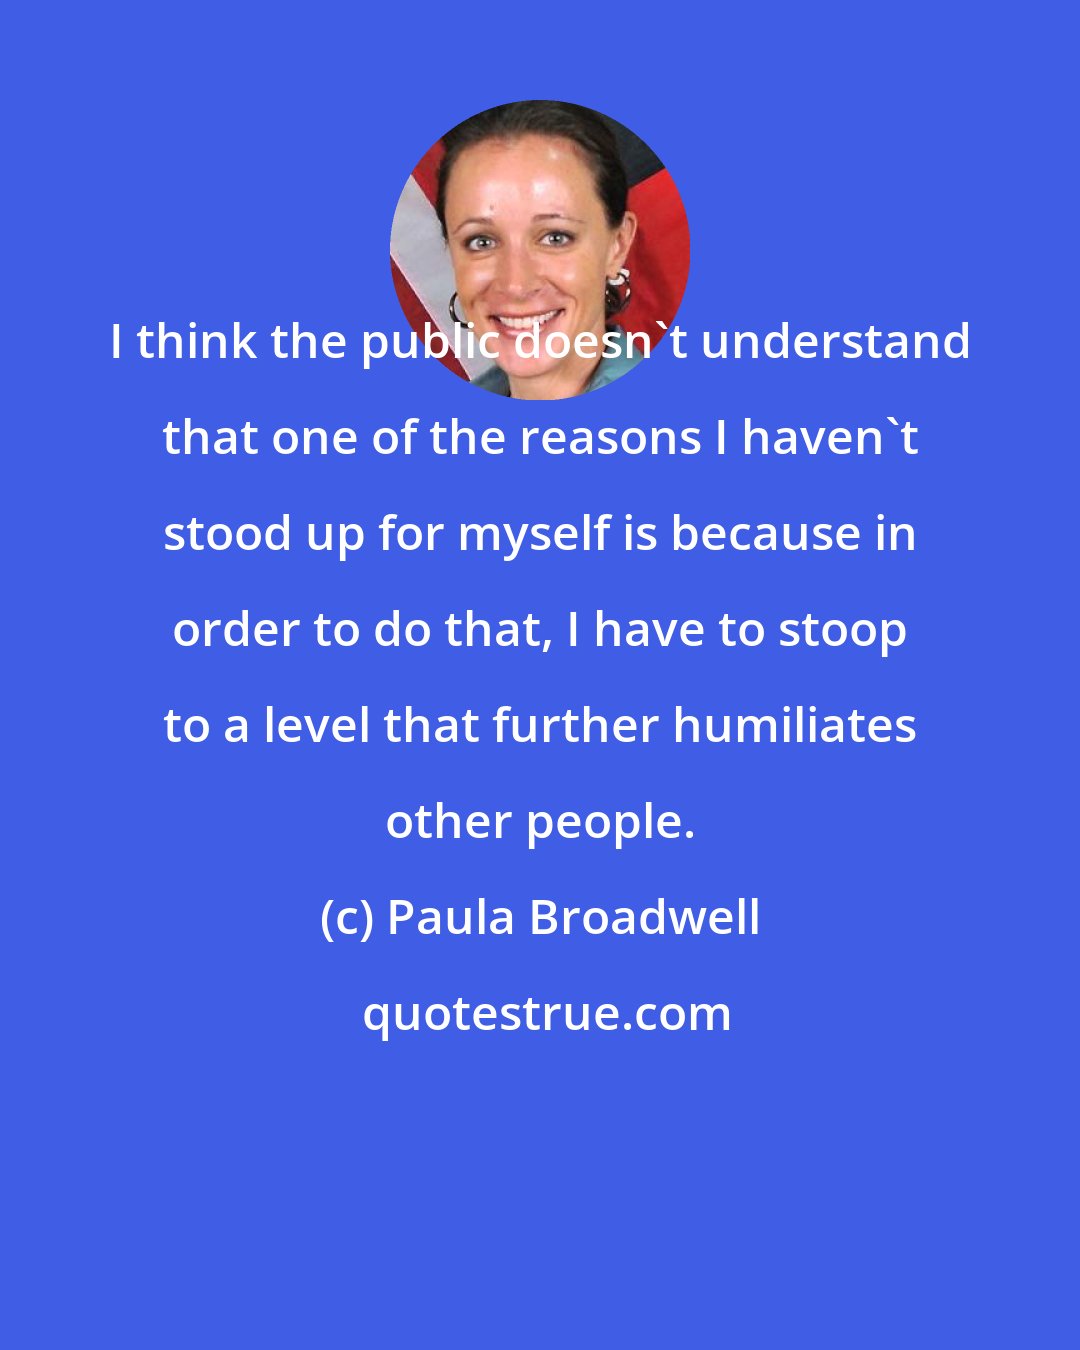 Paula Broadwell: I think the public doesn't understand that one of the reasons I haven't stood up for myself is because in order to do that, I have to stoop to a level that further humiliates other people.